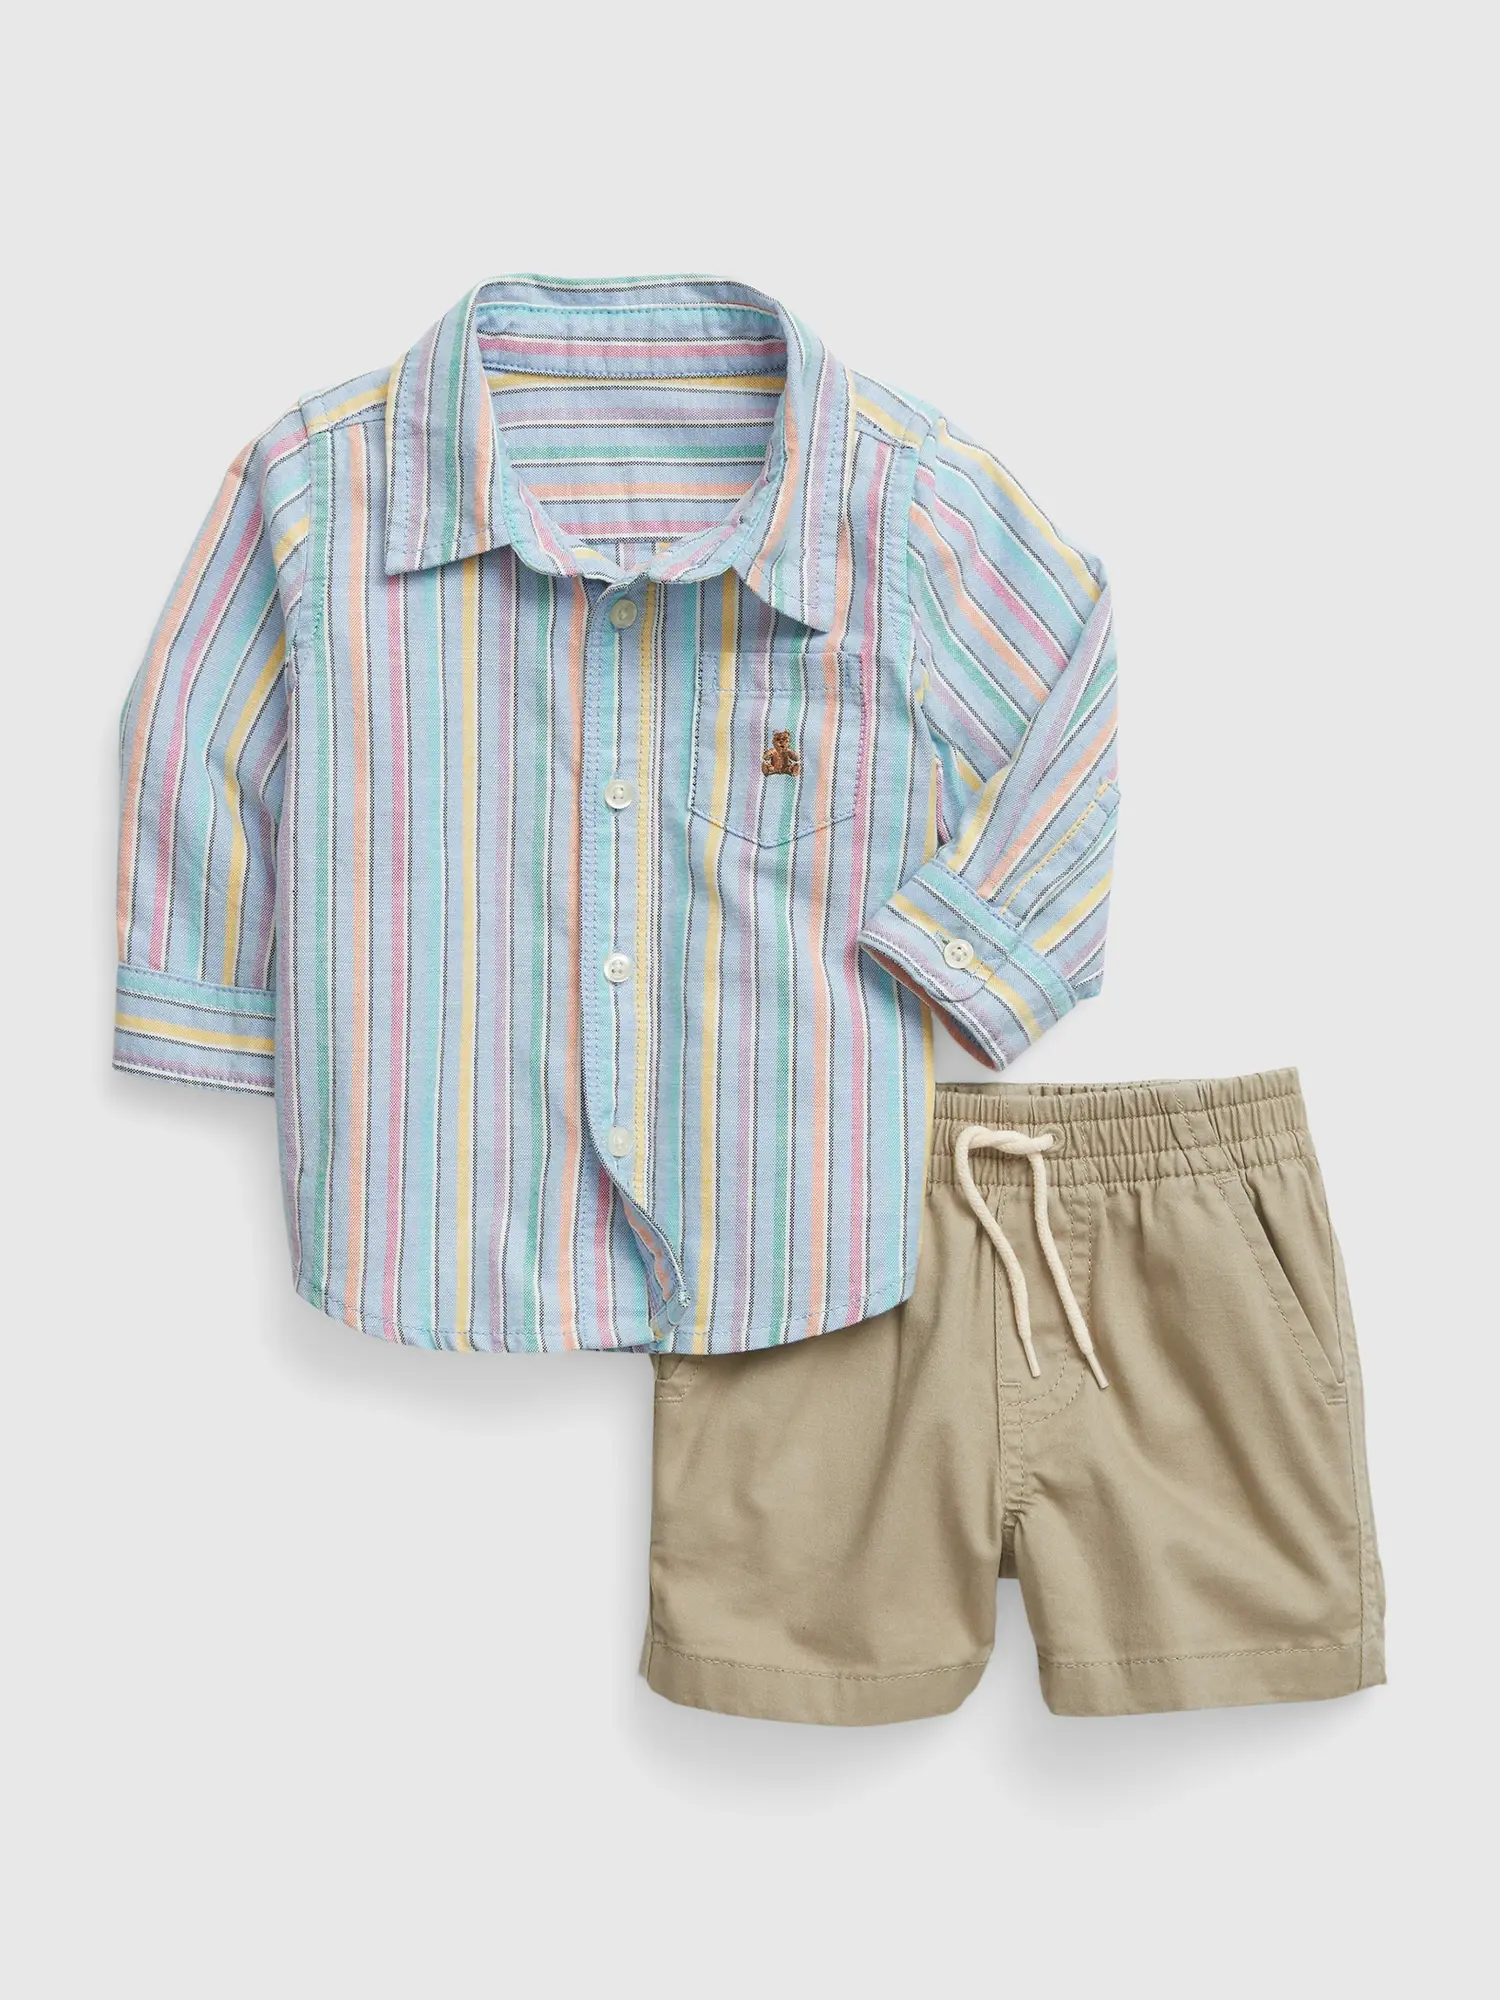 Gap Baby Stripe Two-Piece Outfit Set multi. 1